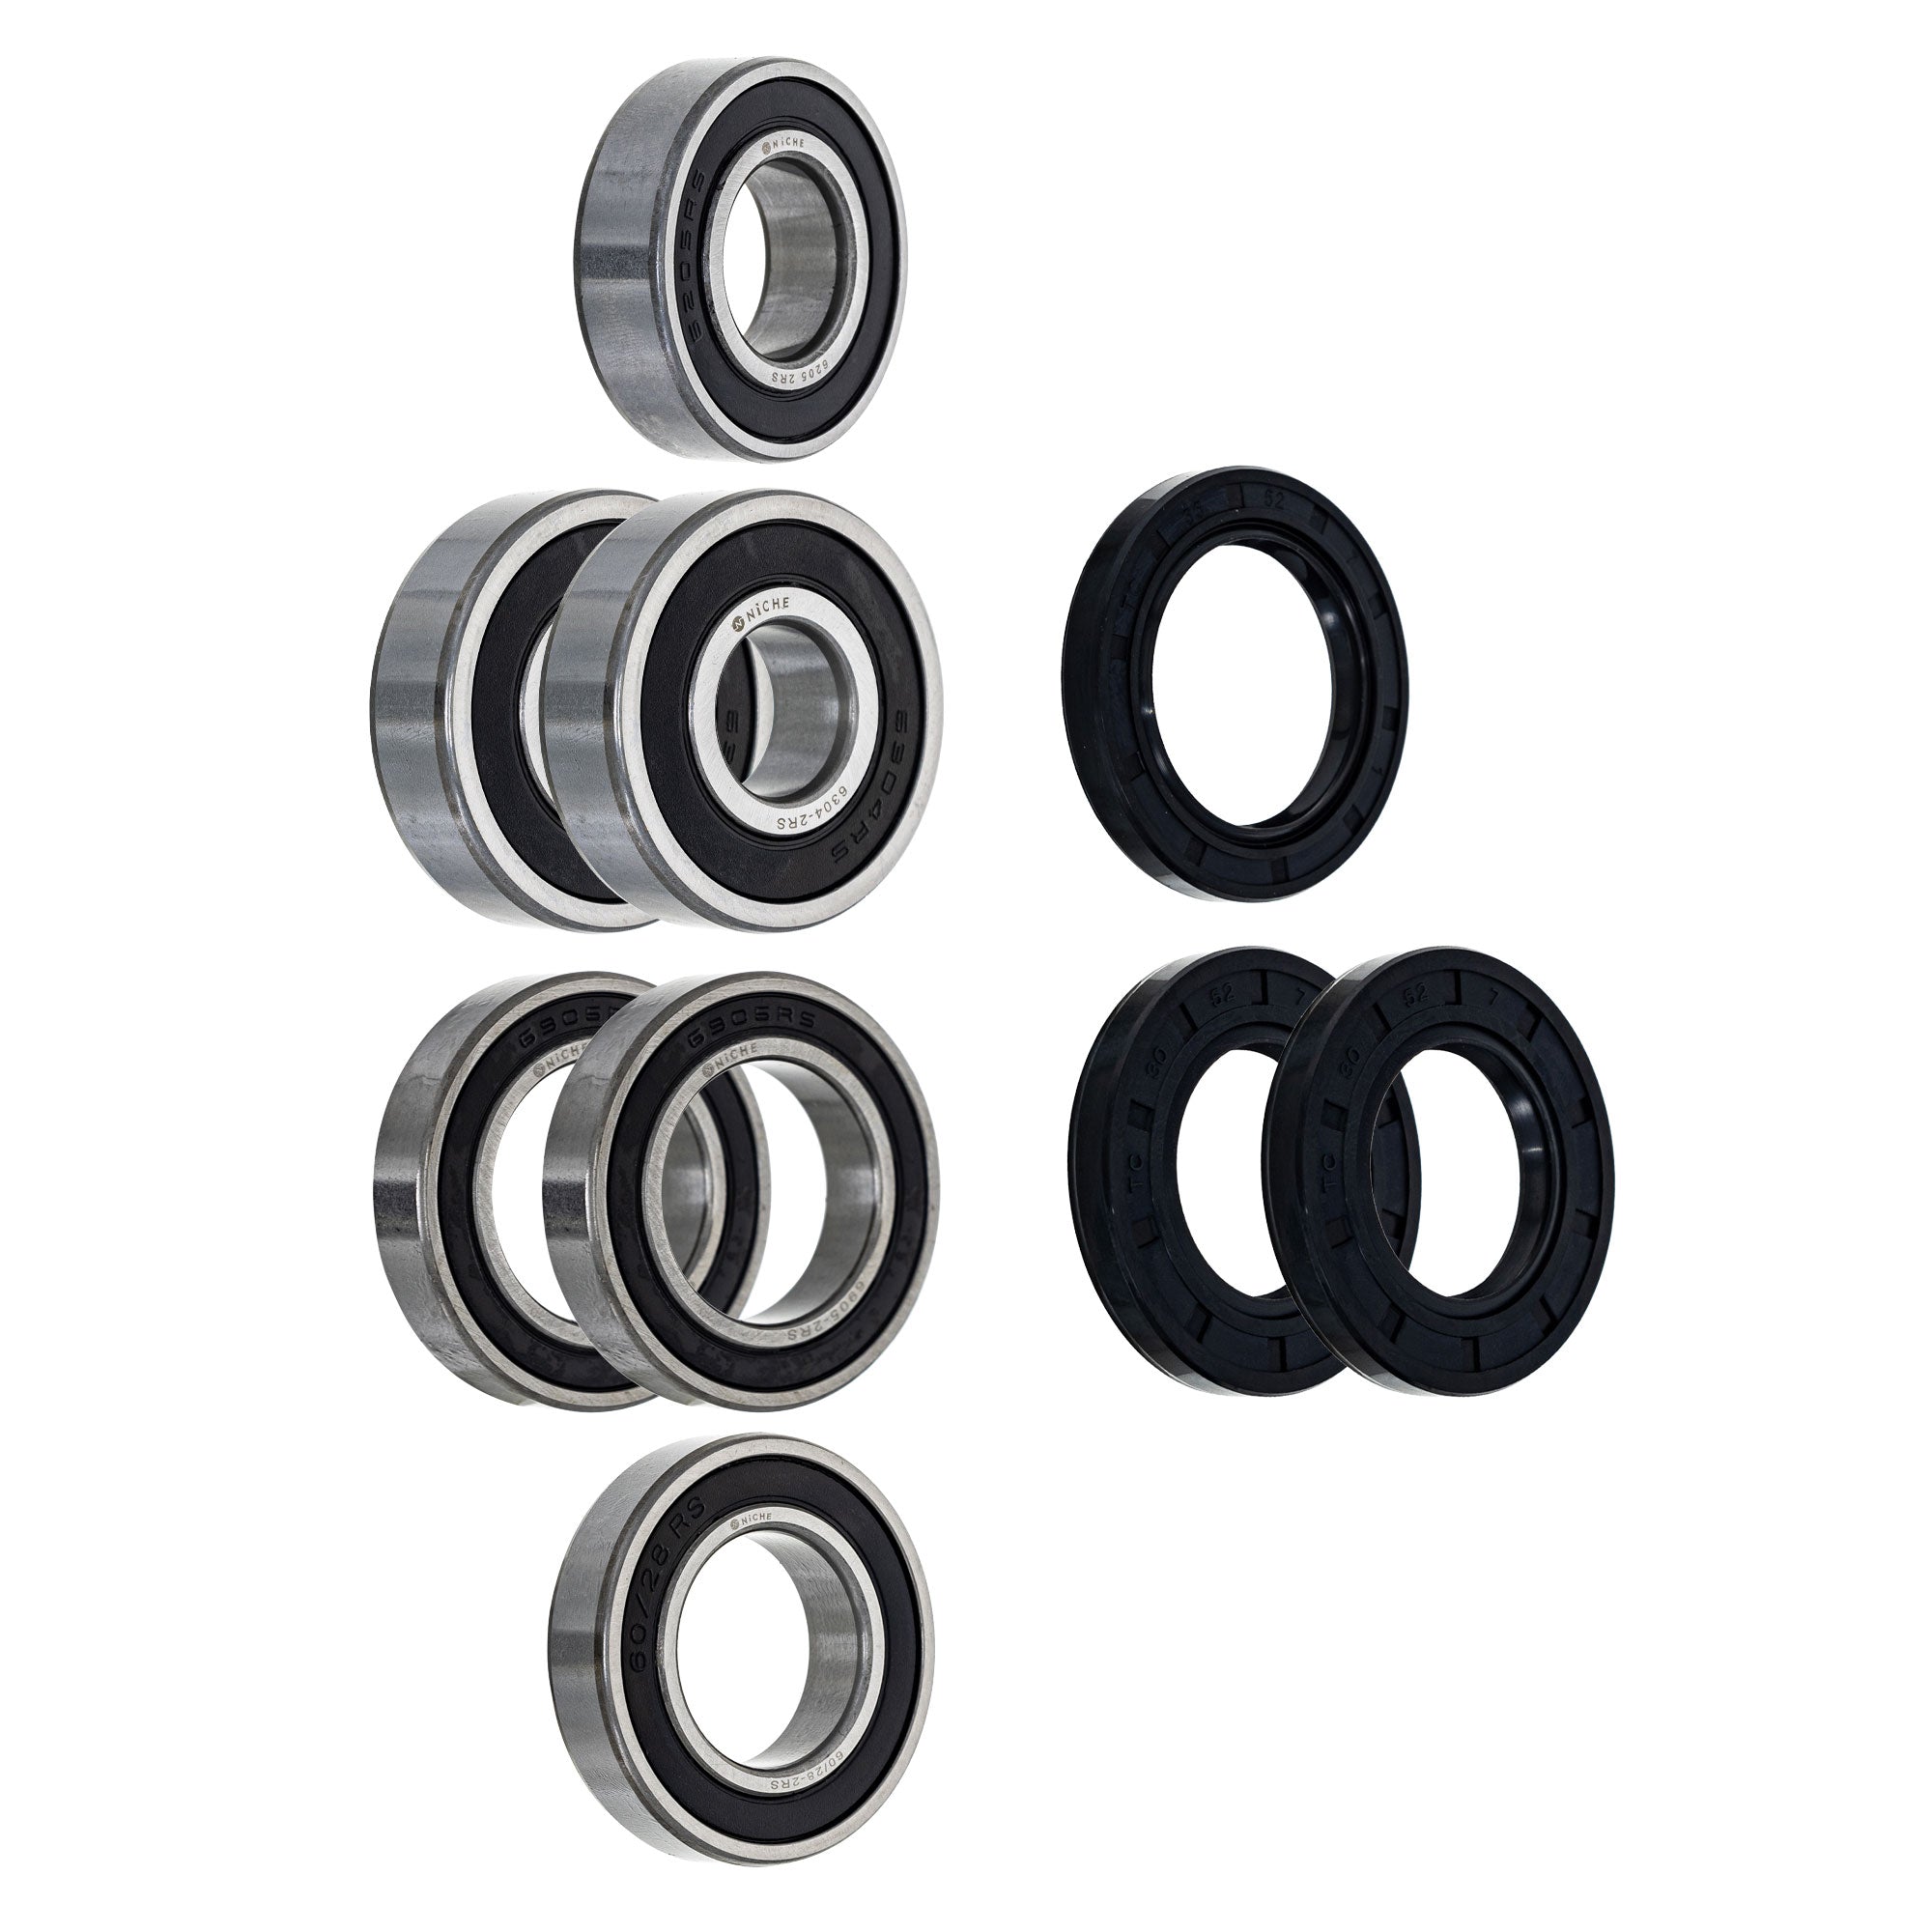 Wheel Bearing Seal Kit for zOTHER Ref No Fury NICHE MK1009278